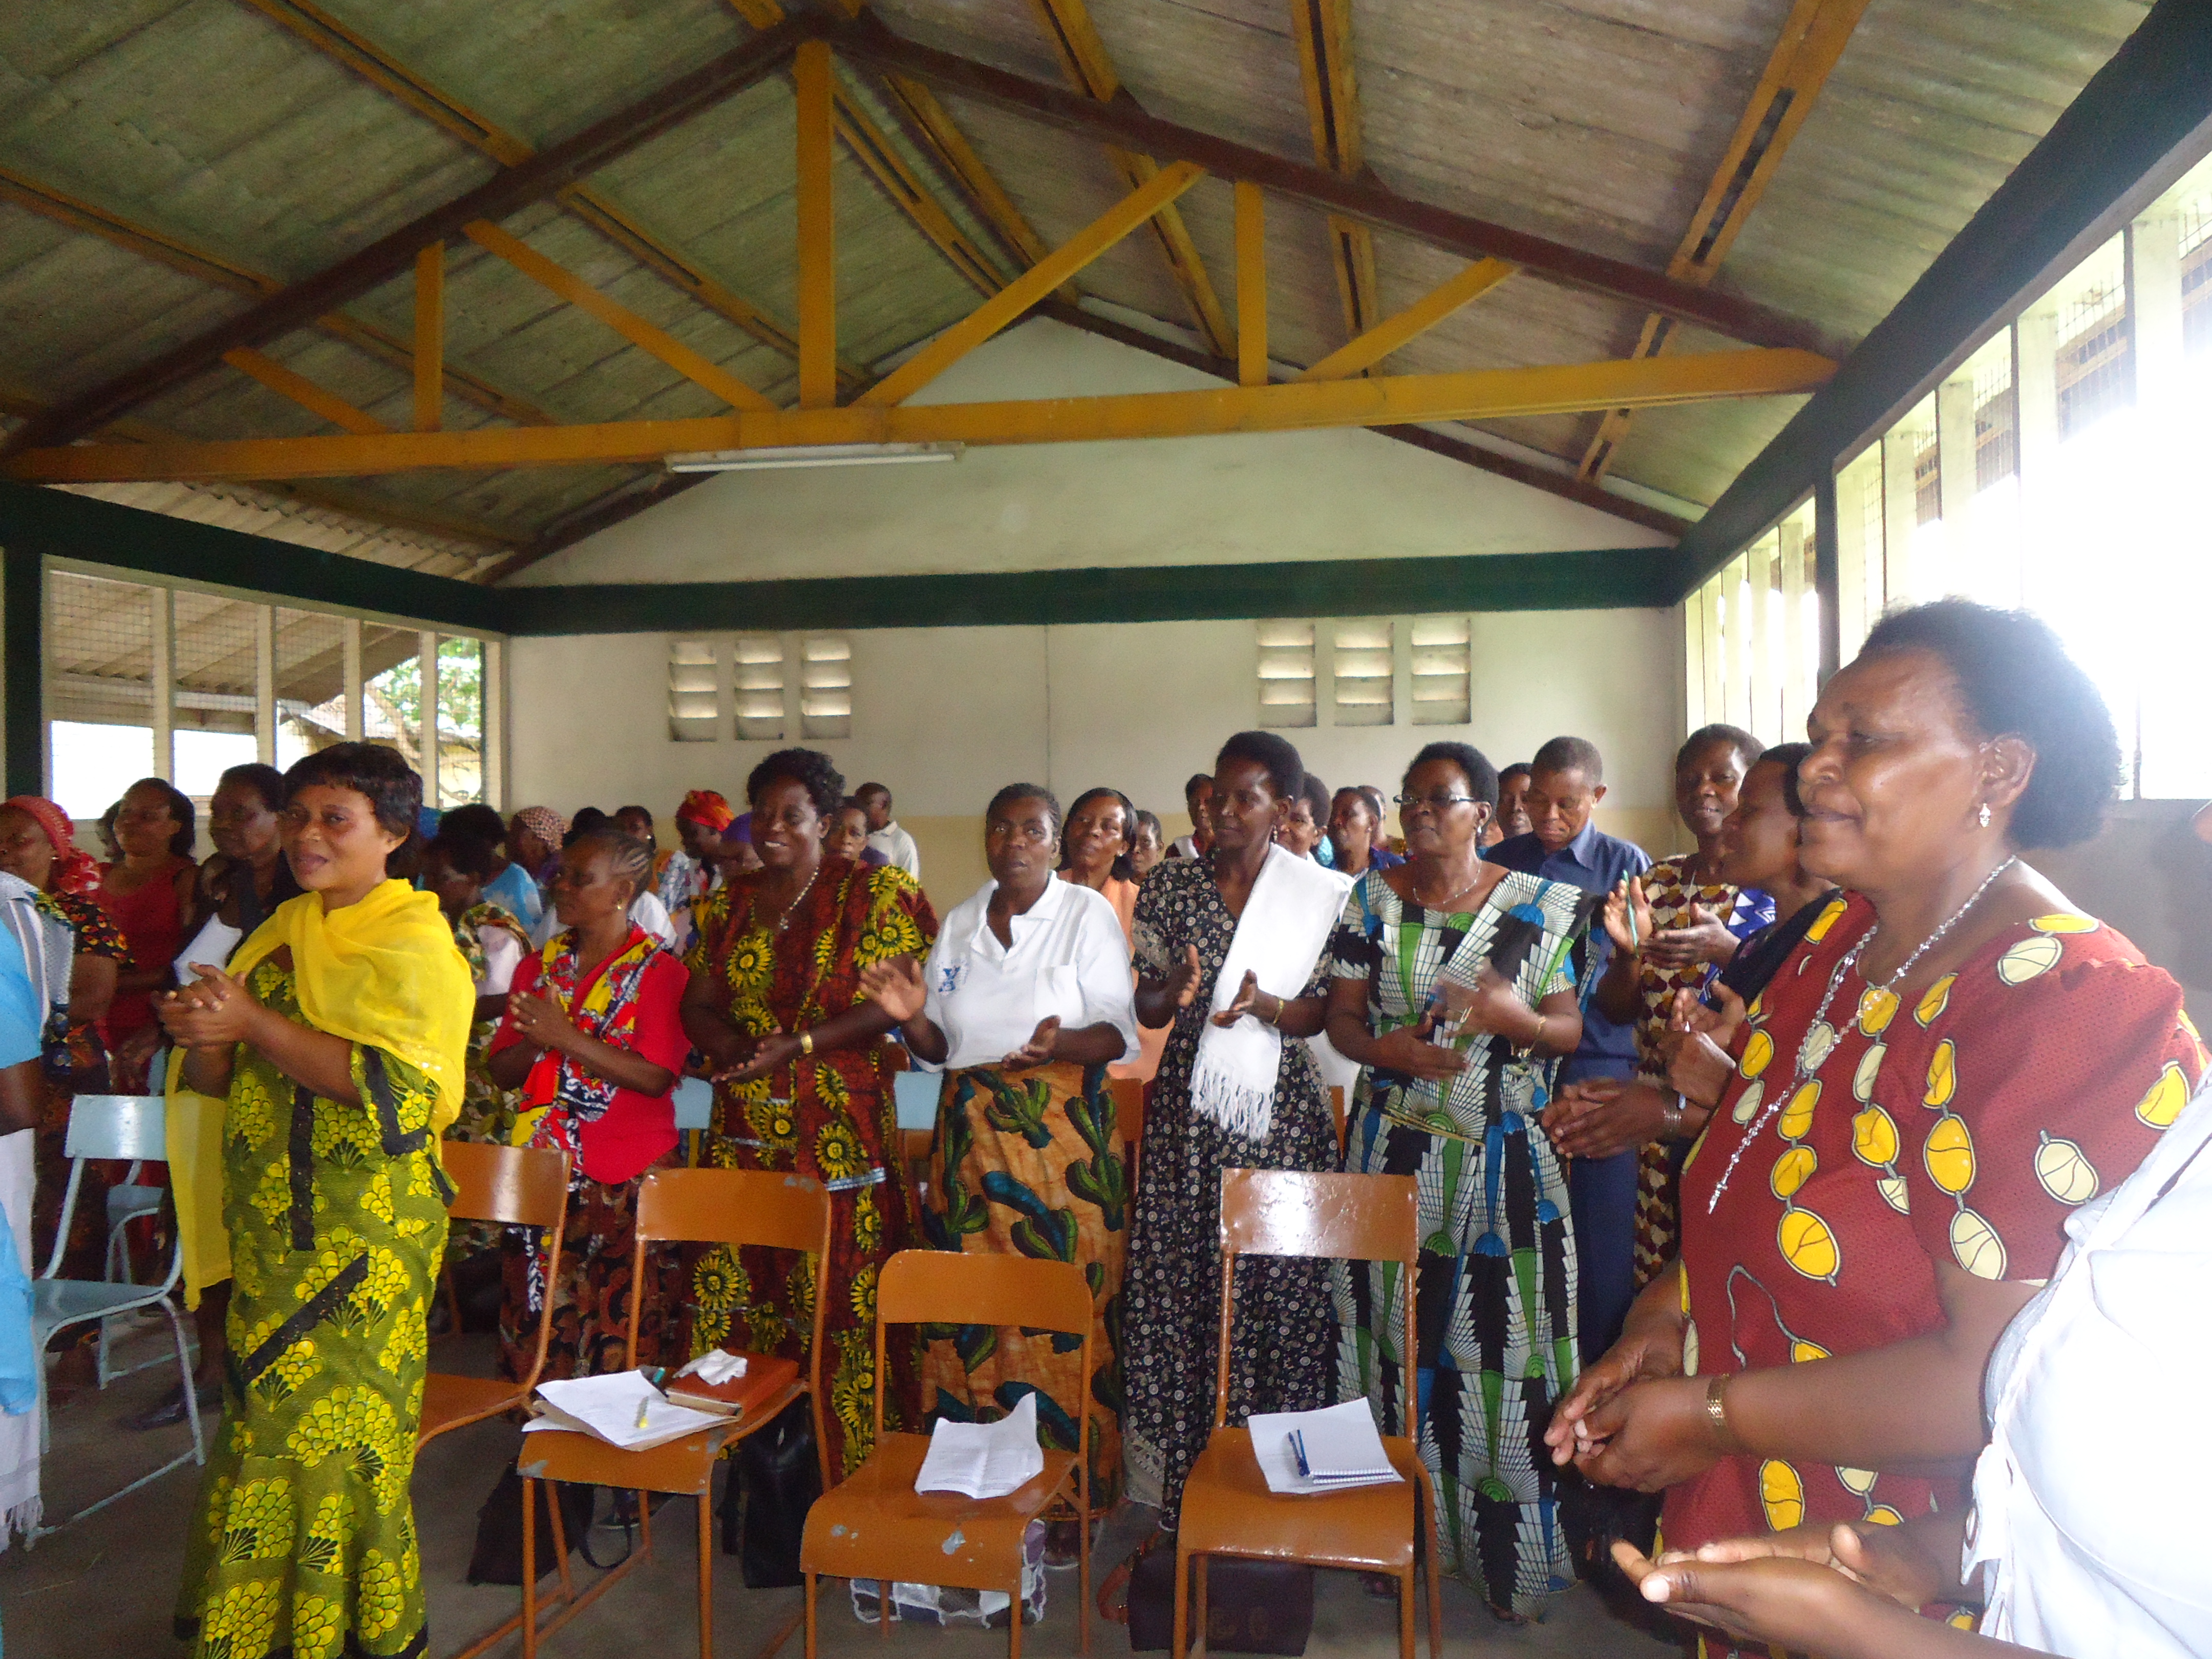 Influenced land rights for Women in Karatu District